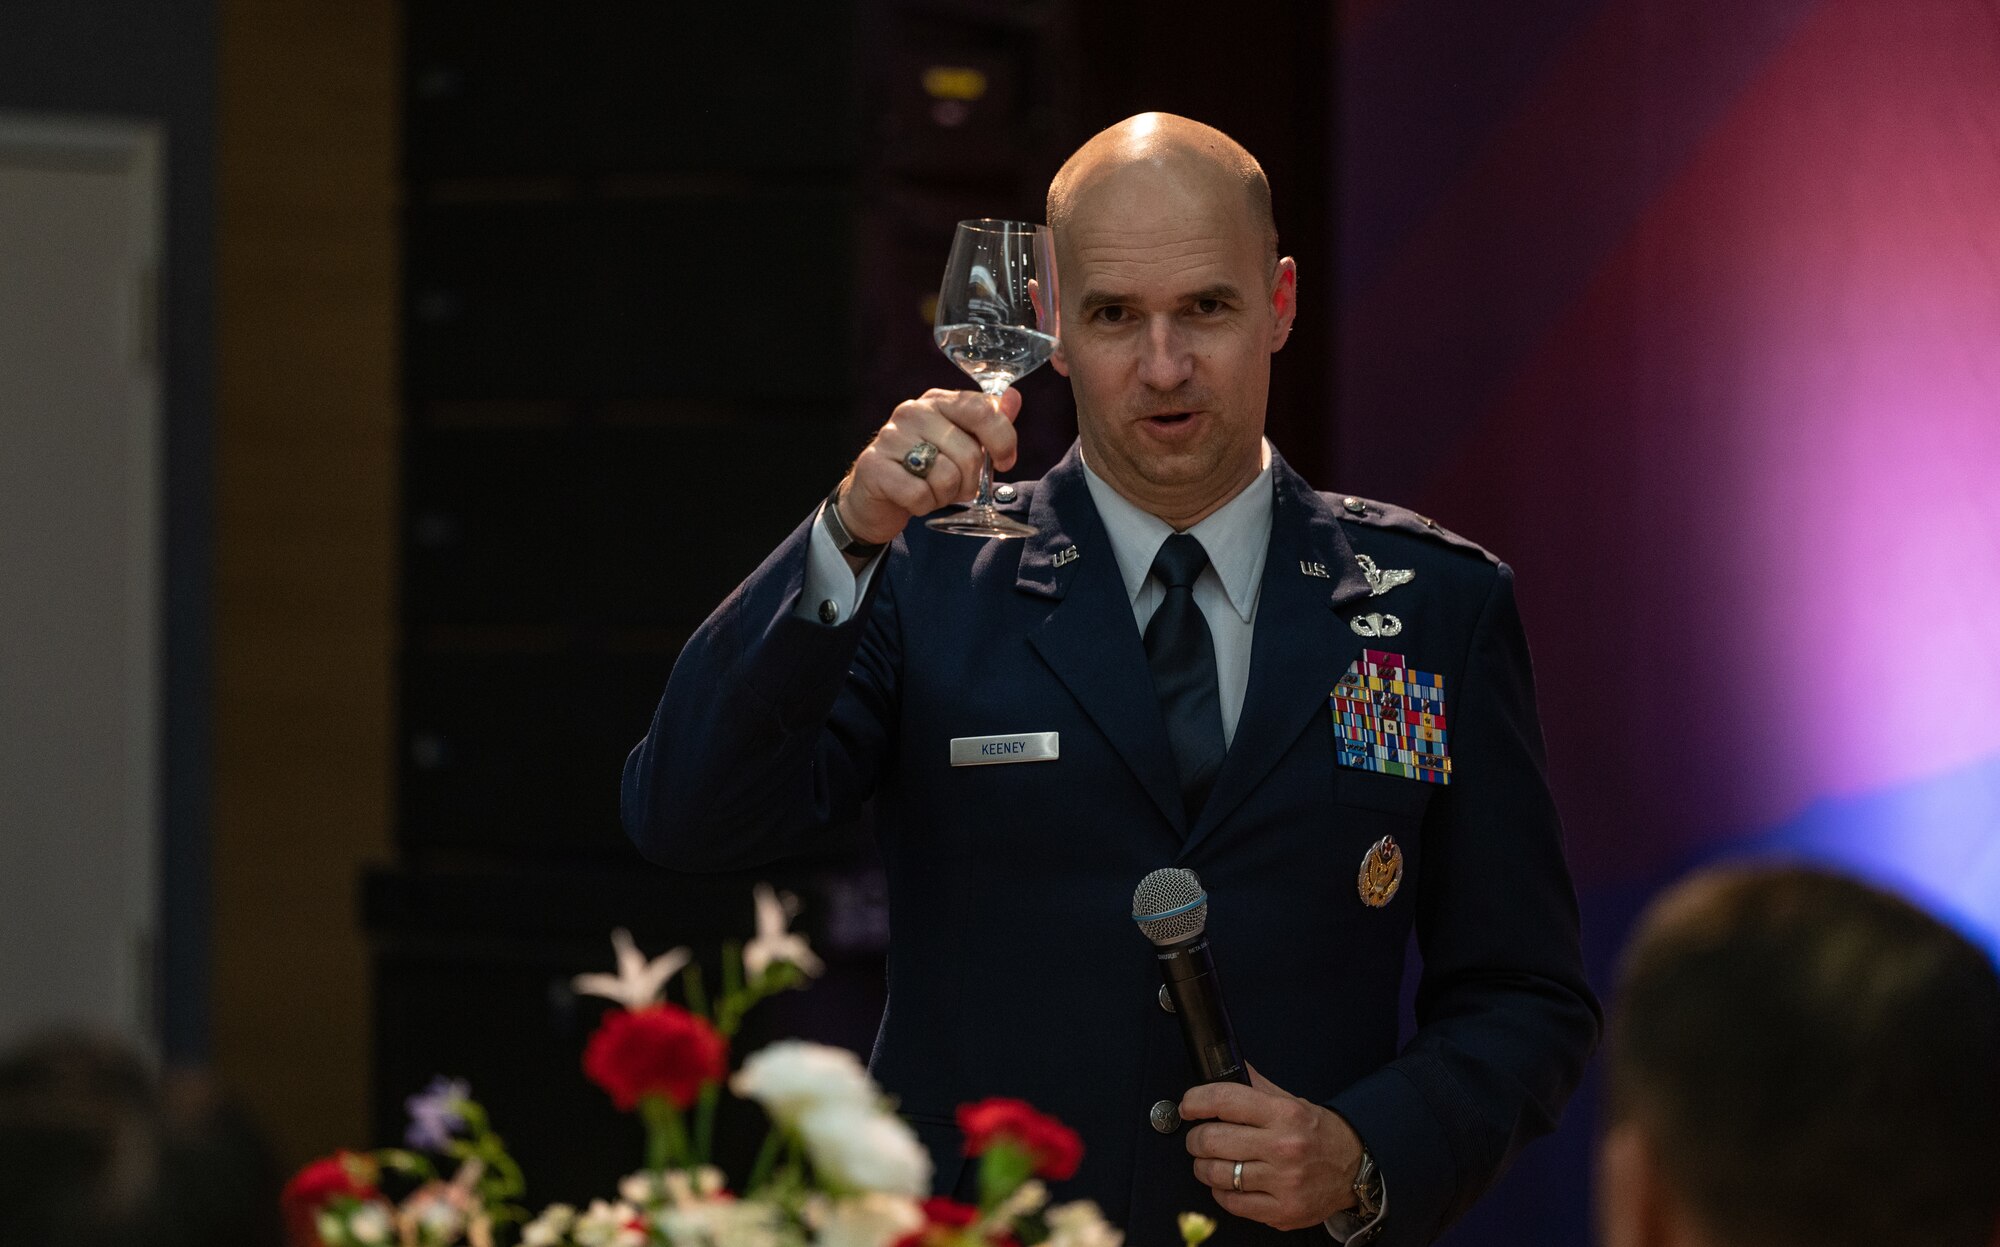 U.S. Air Force Brig. Gen. Ryan P. Keeney, 7th Air Force deputy commander, speaks and gives a toast during the Dean Hess Commemorative Ceremony at Jeju Aerospace Museum, Jeju, Republic of Korea, May 11, 2023